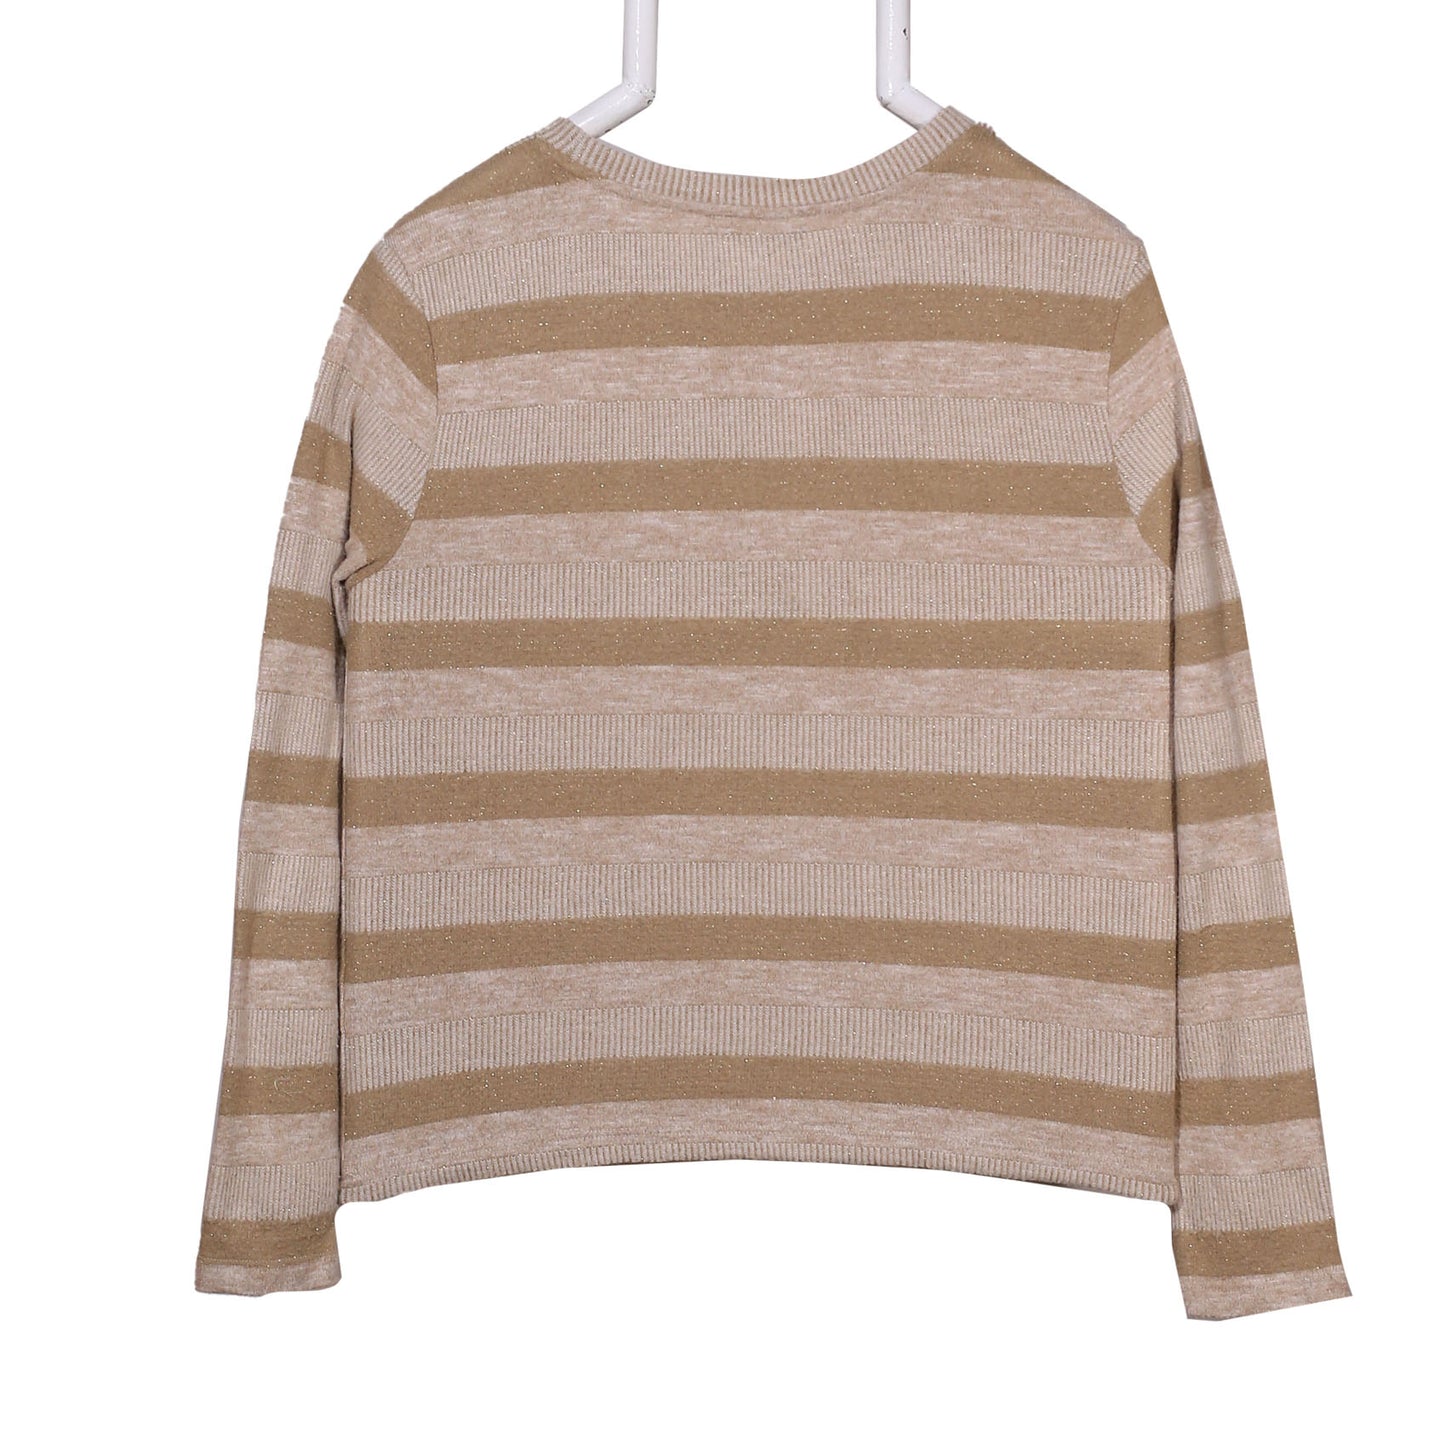 M&S COLLECTION SWEATER